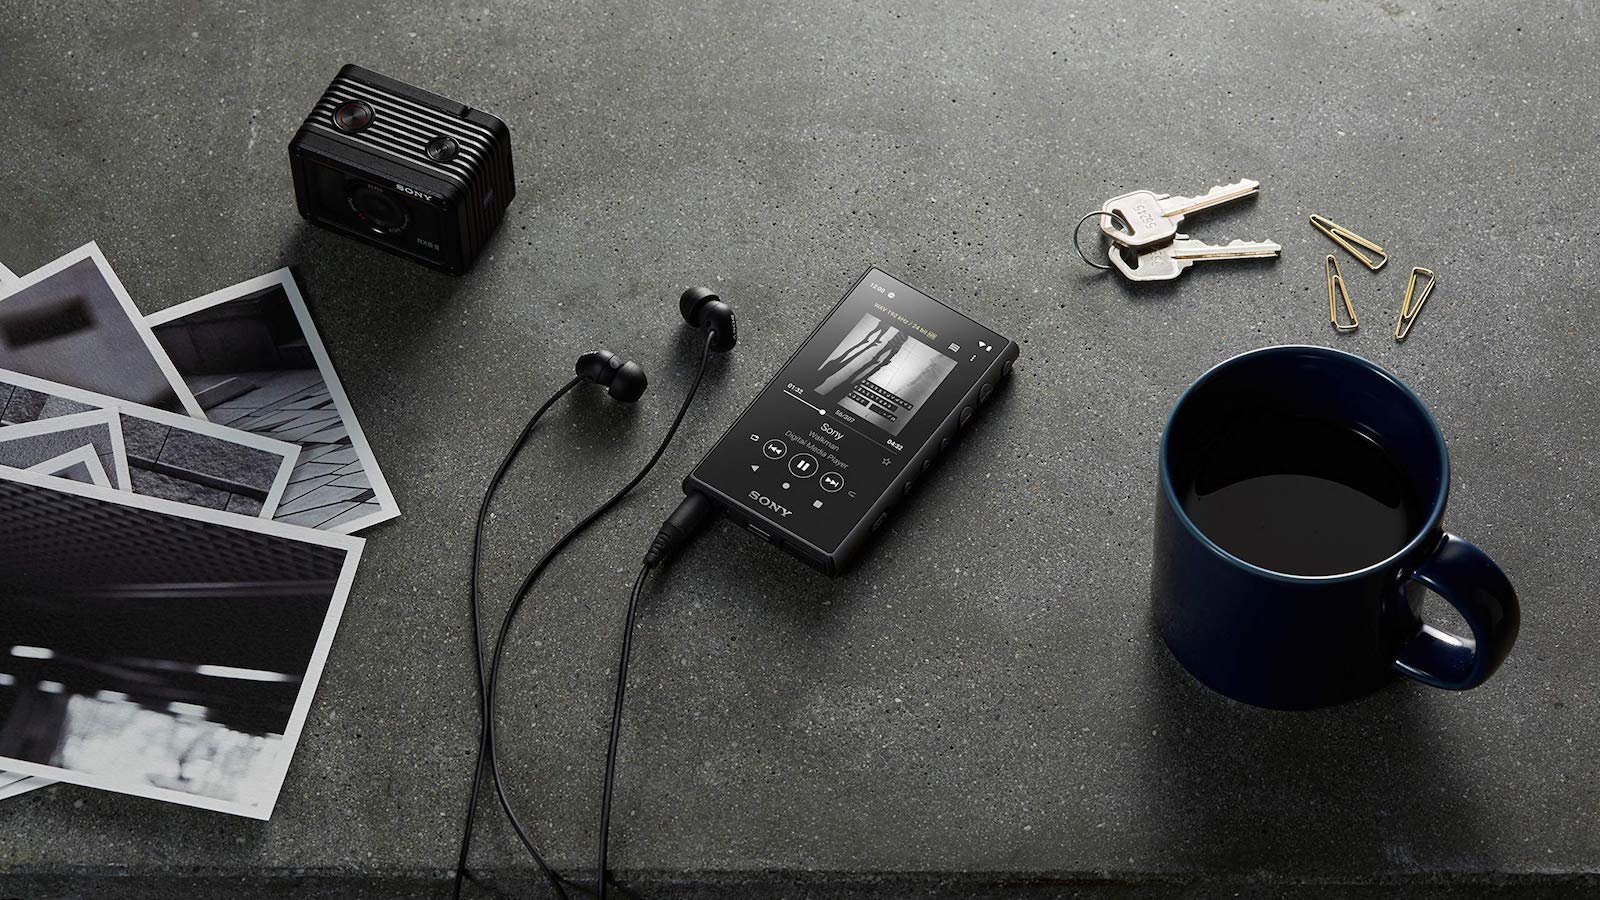 Sony Walkman NW-A105 digital music player features a S-Master HX amplifier for pure sound